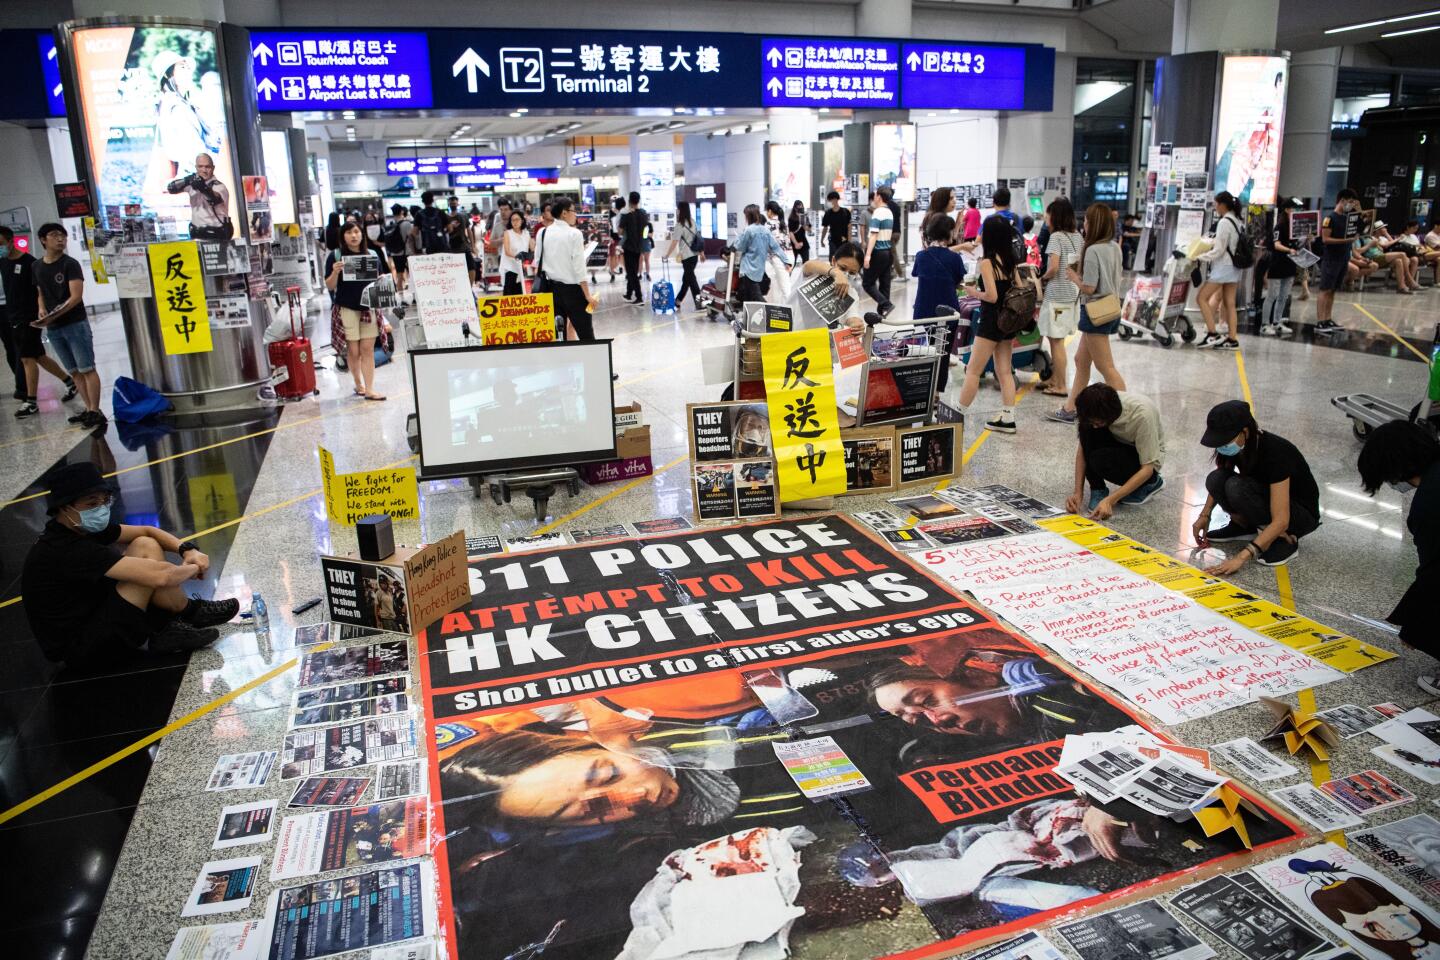 Hong Kong airport suspends flights for second day, China - 13 Aug 2019